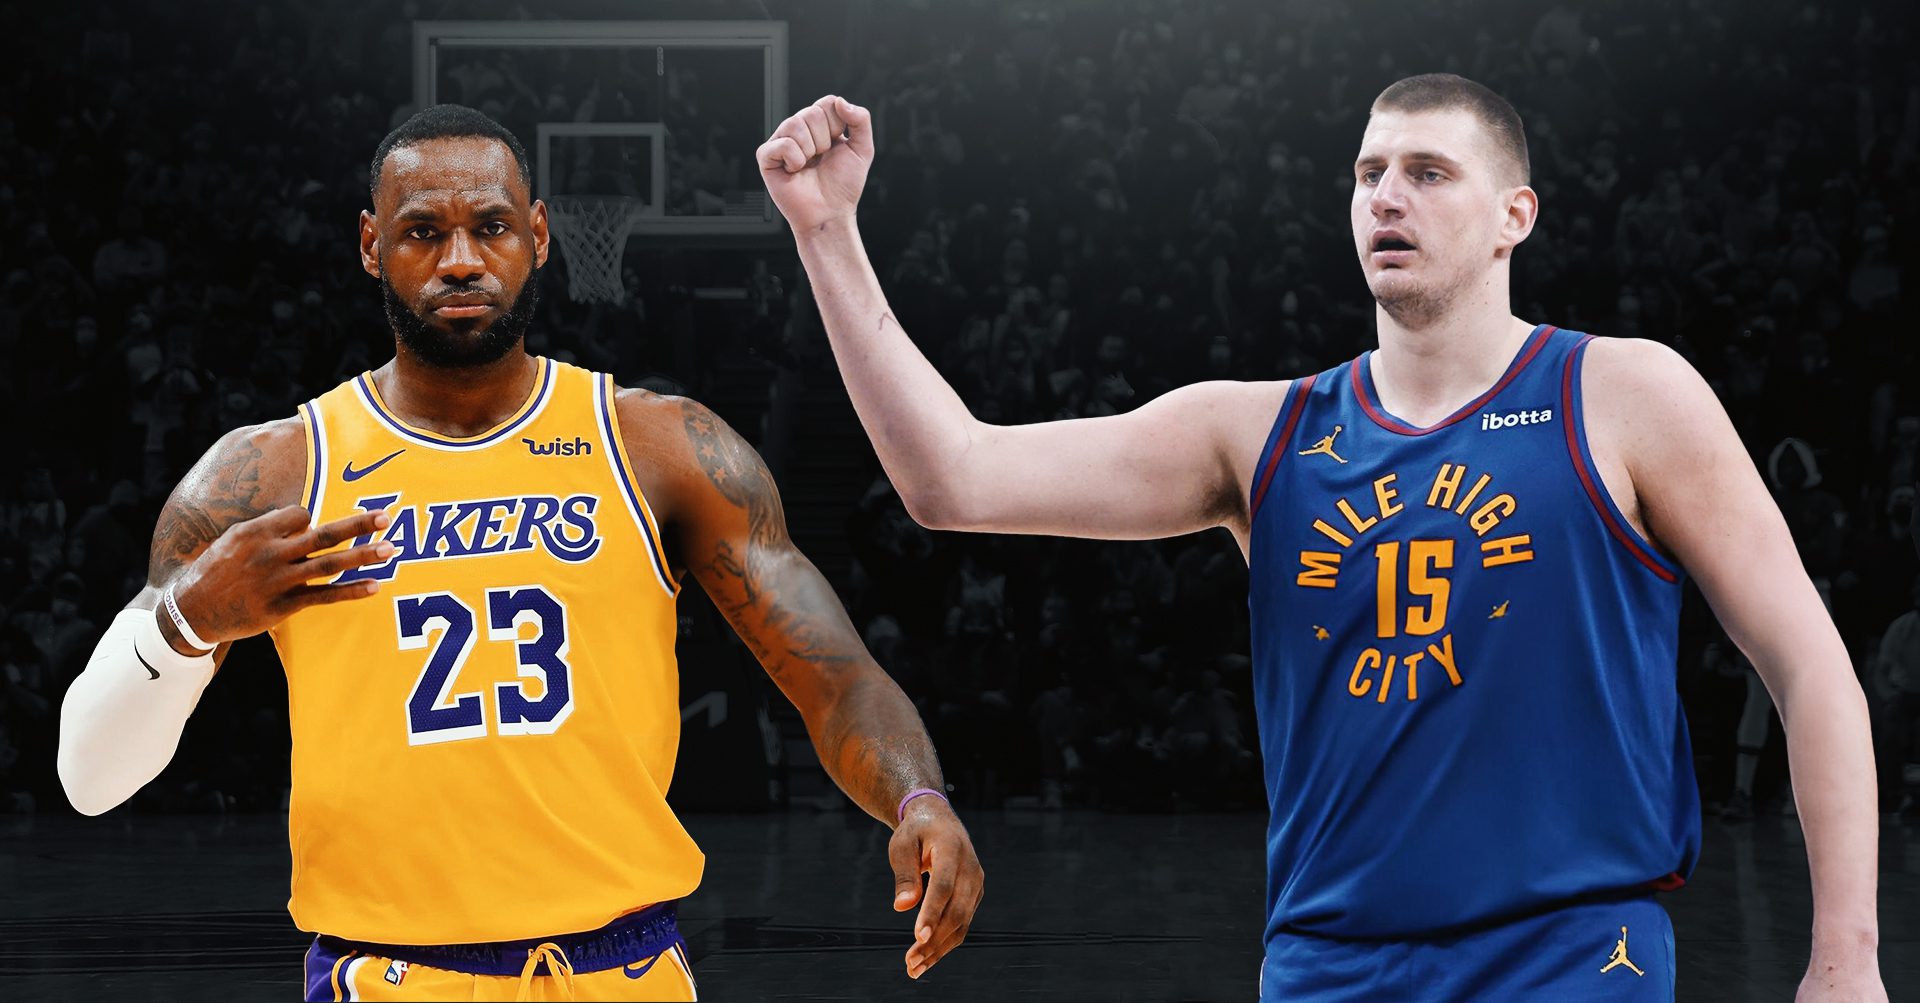 LeBron and Jokic’s Former Teammmate on Their Big Differences